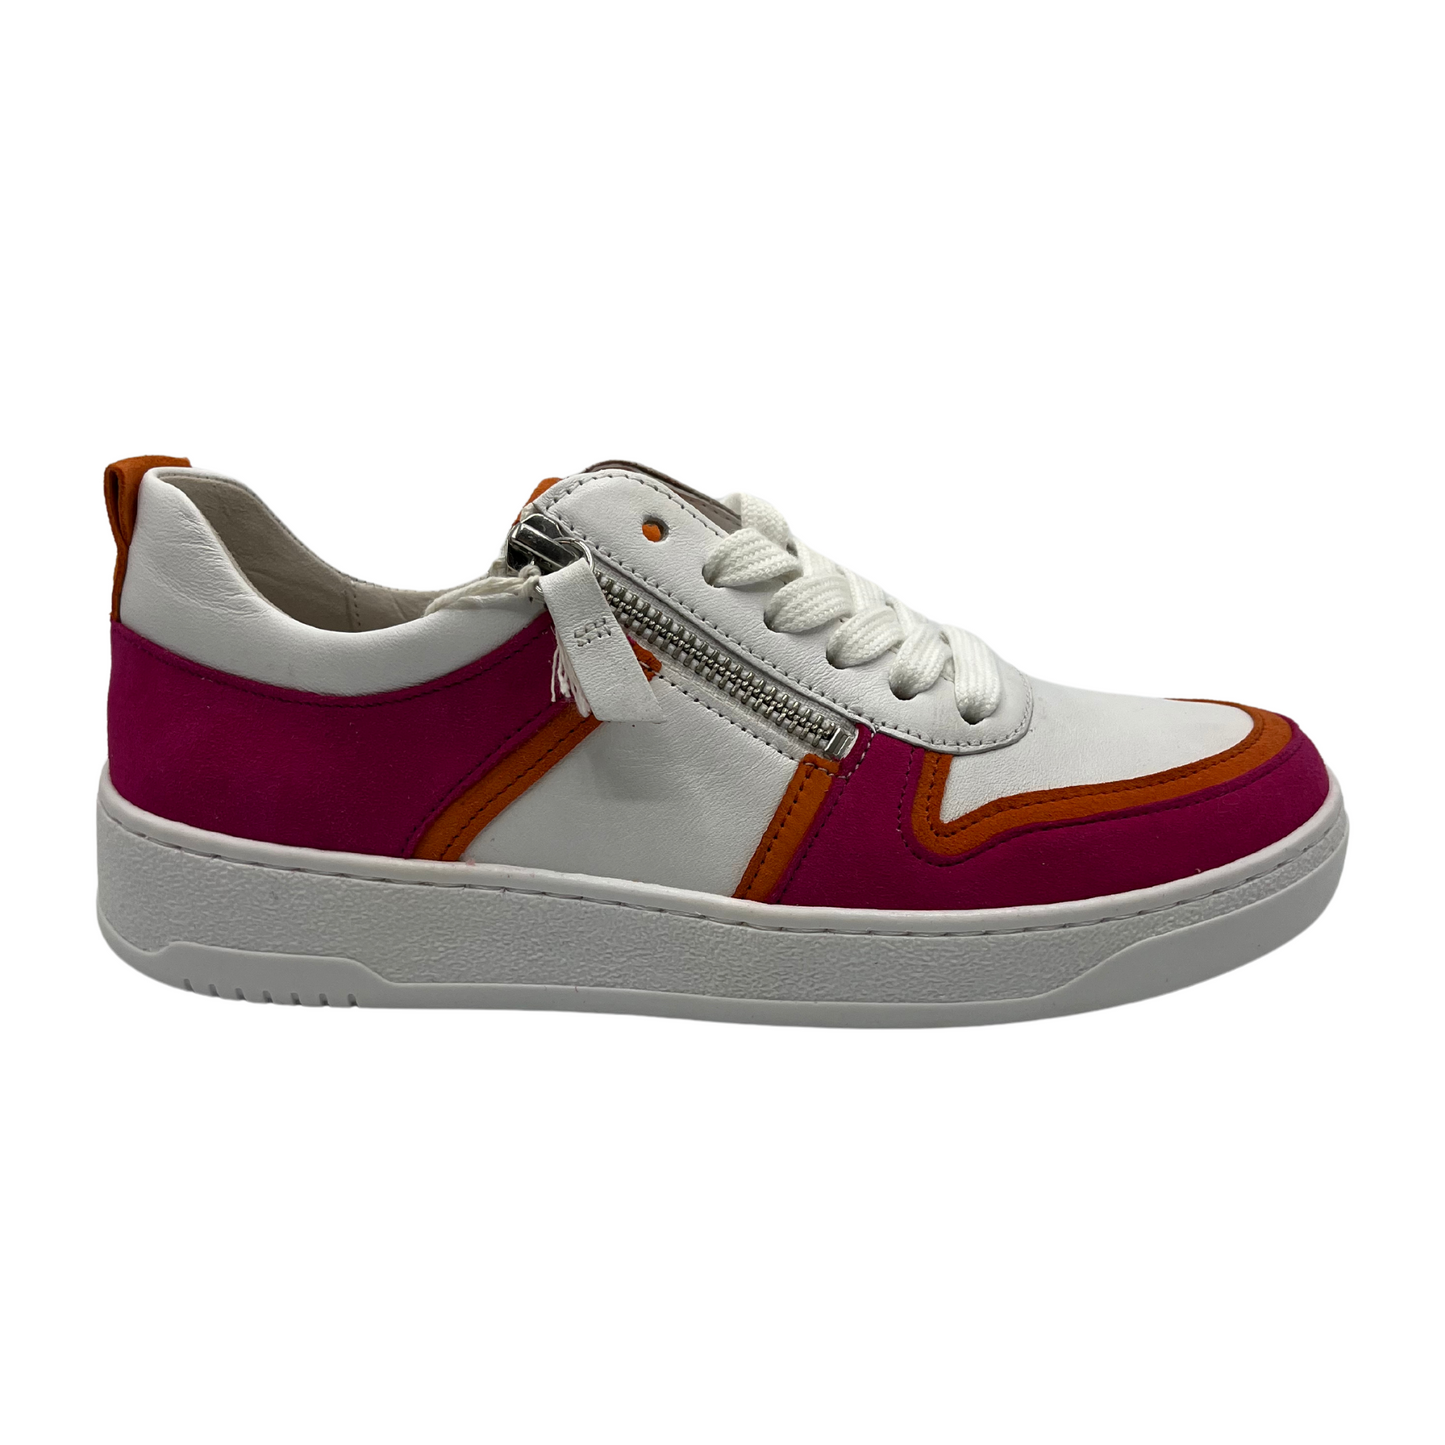 Right facing view of white, fuchsia and orange sneaker with white laces and rubber outsole.